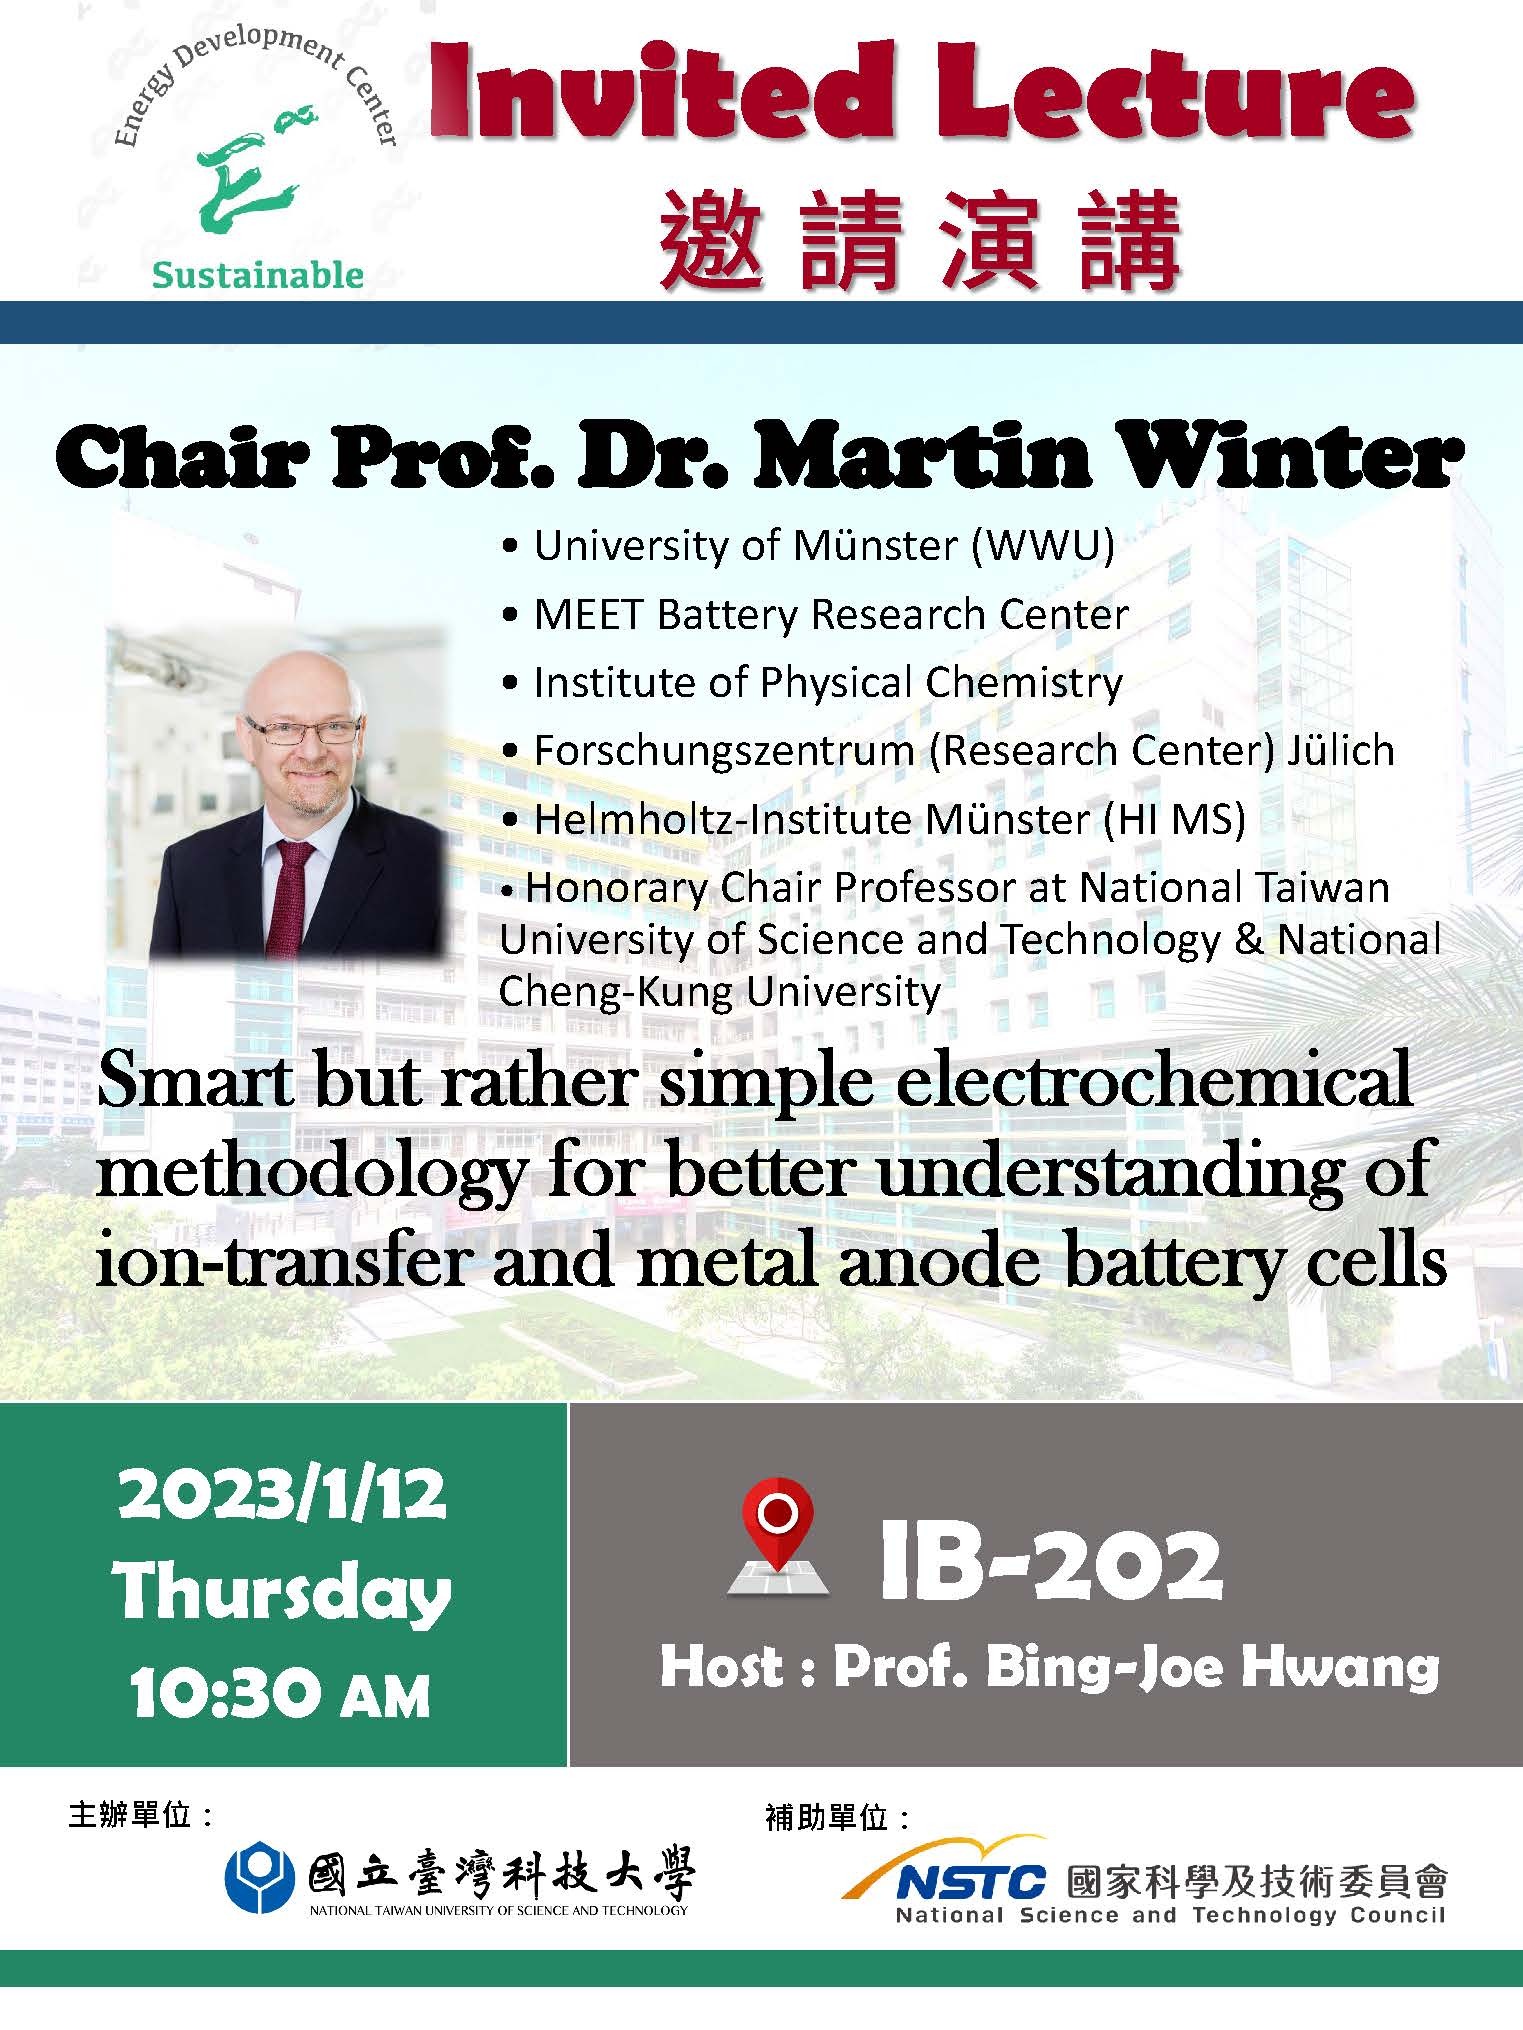 2023/1/12 Thursday IB-202 10:30 AM Invited Lecture：Chair Prof. Dr. Martin Winter